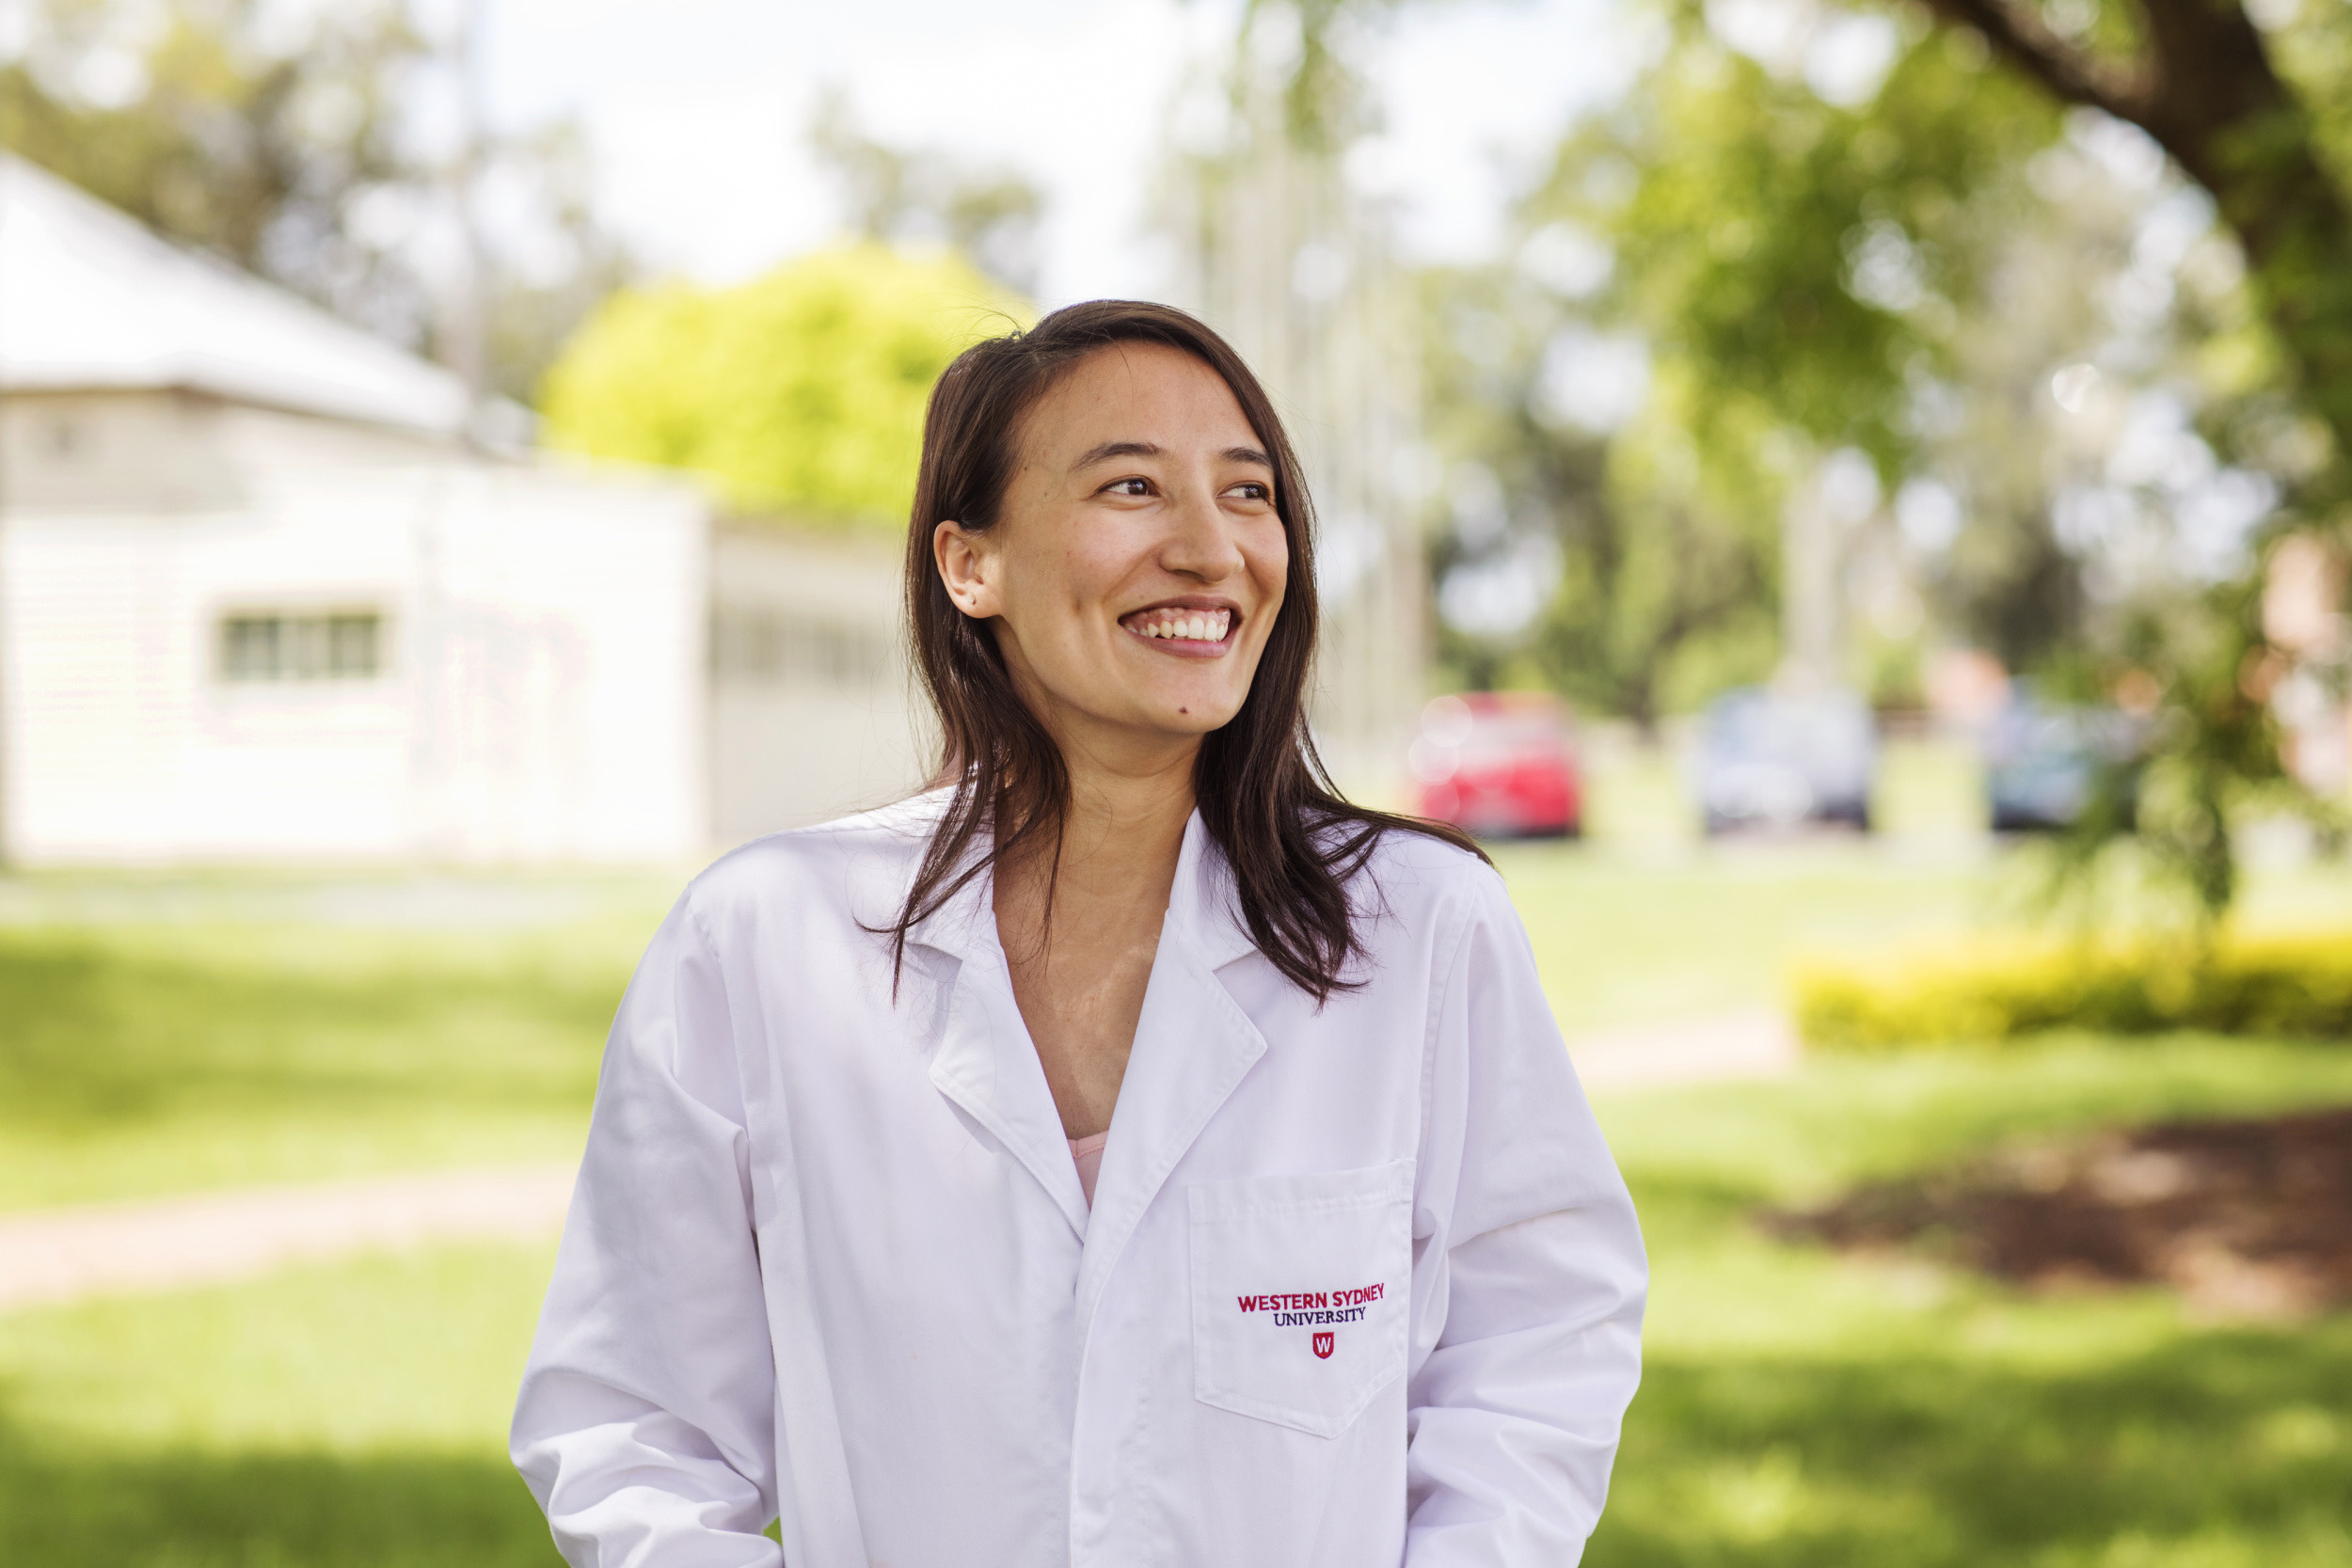 Western Sydney University researcher smiling on campus and wearing a lab coat